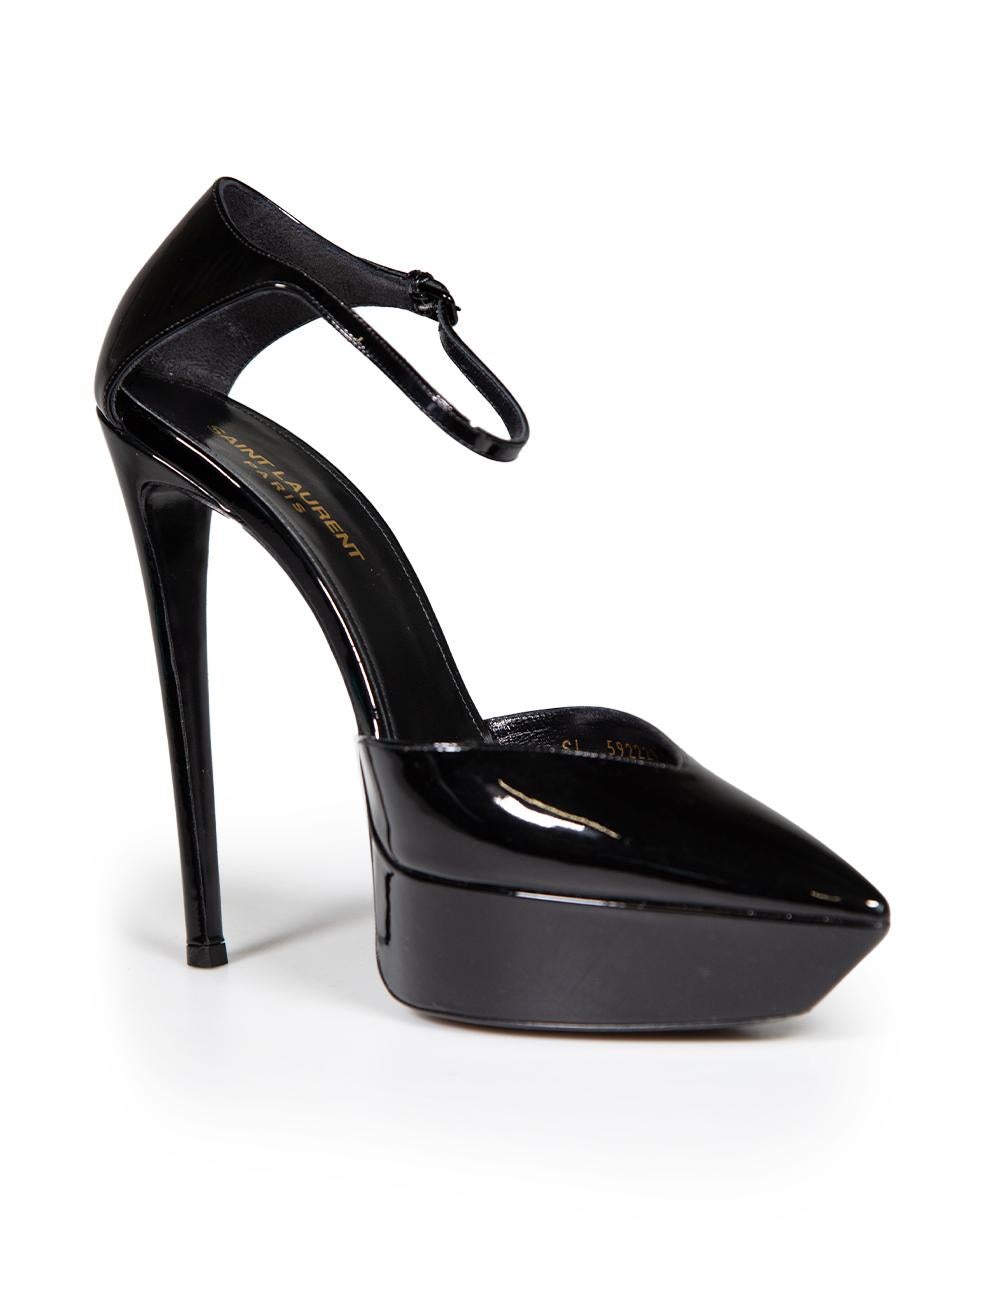 CONDITION is Very good. Minimal wear to pumps is evident. Minimal wear to soles on this used Saint Laurent designer resale item. These shoes come with original box and dust bag.
 
 
 
 Details
 
 
 Model: Zizi
 
 Black
 
 Patent leather
 
 Heels
 
